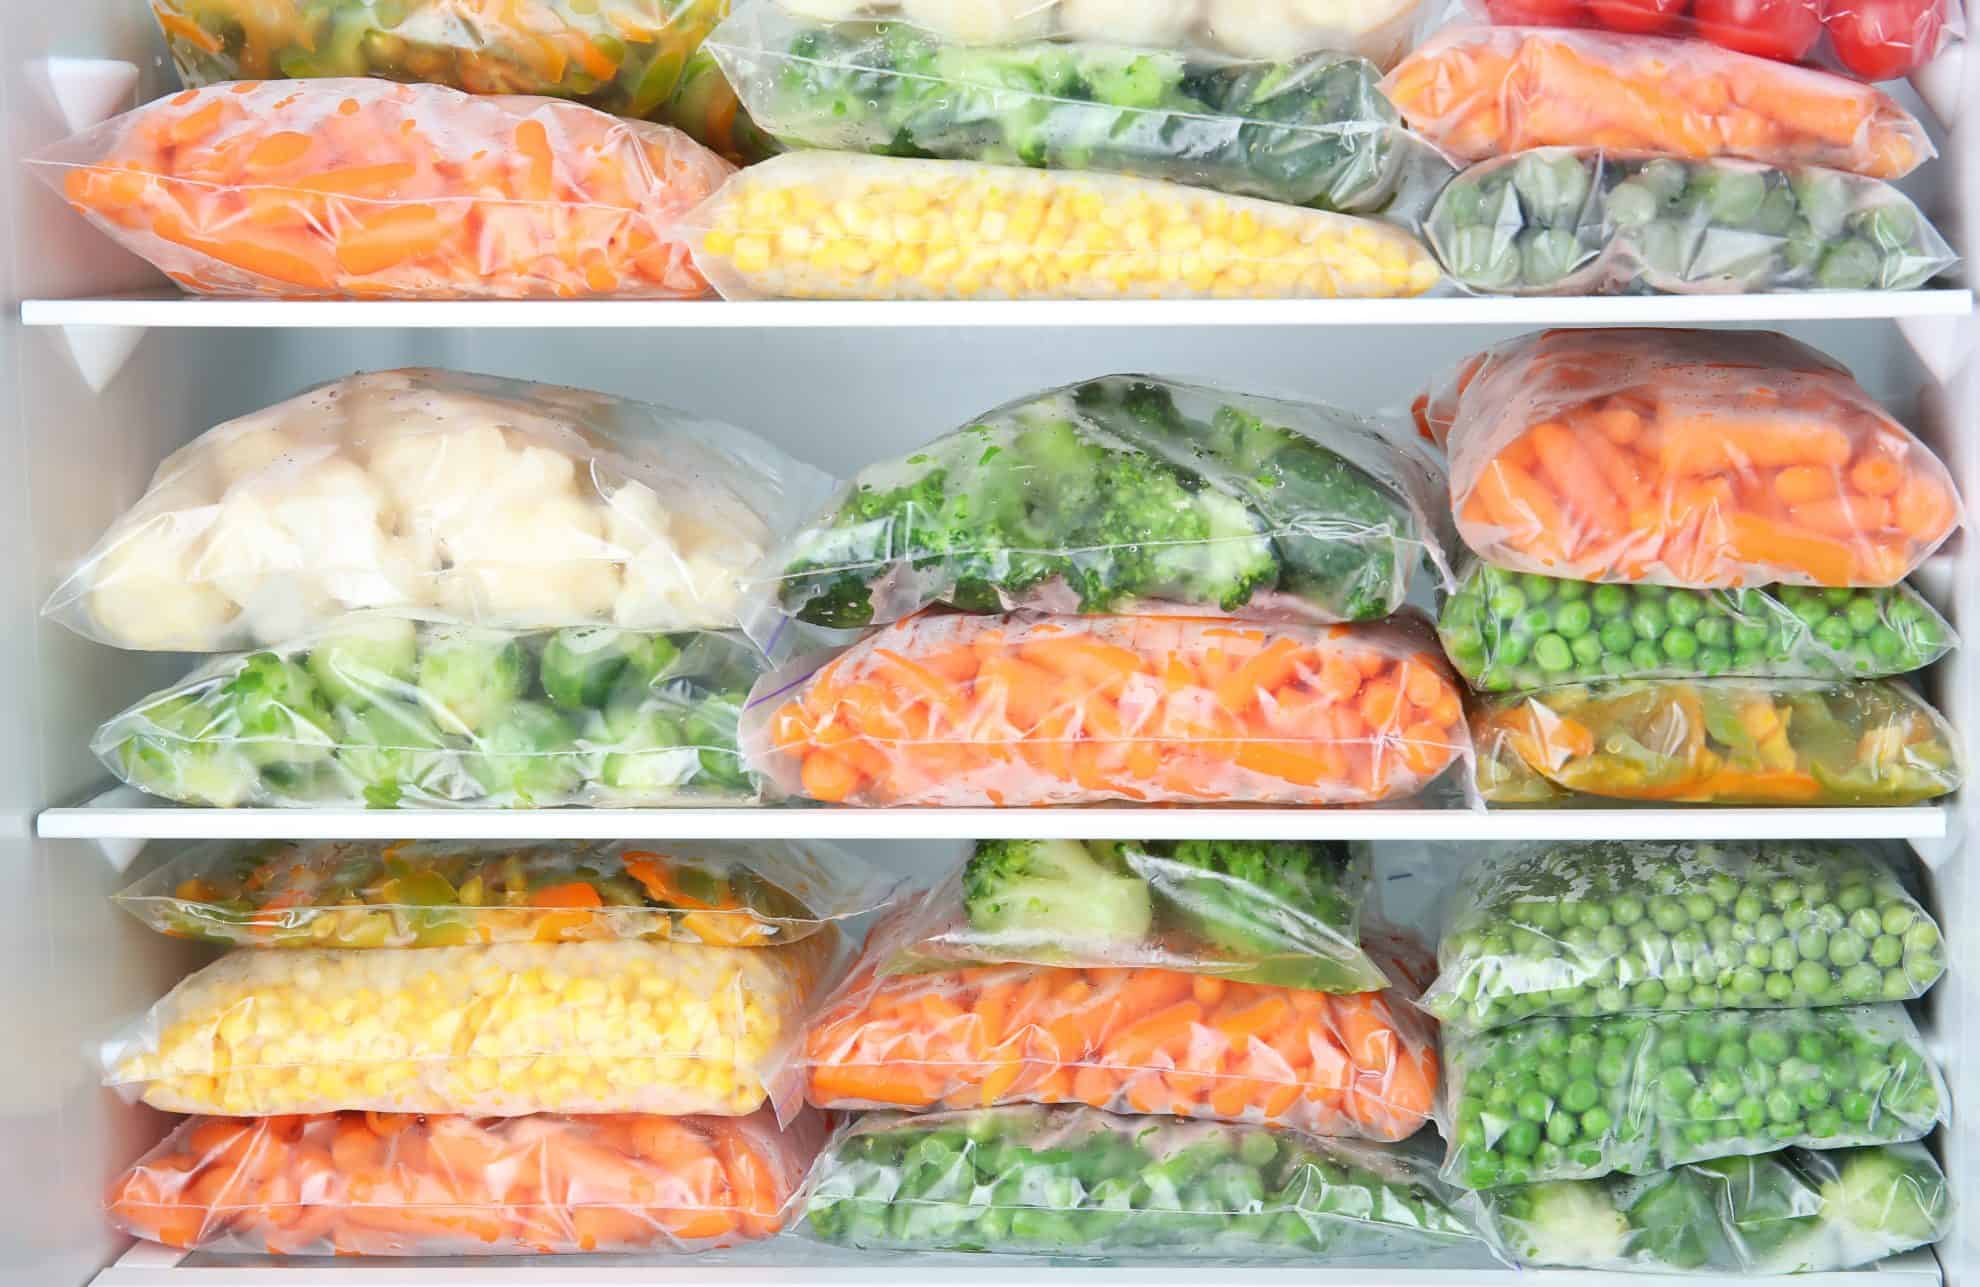 How to Properly Freeze Food - Keep Food Frozen Longer!